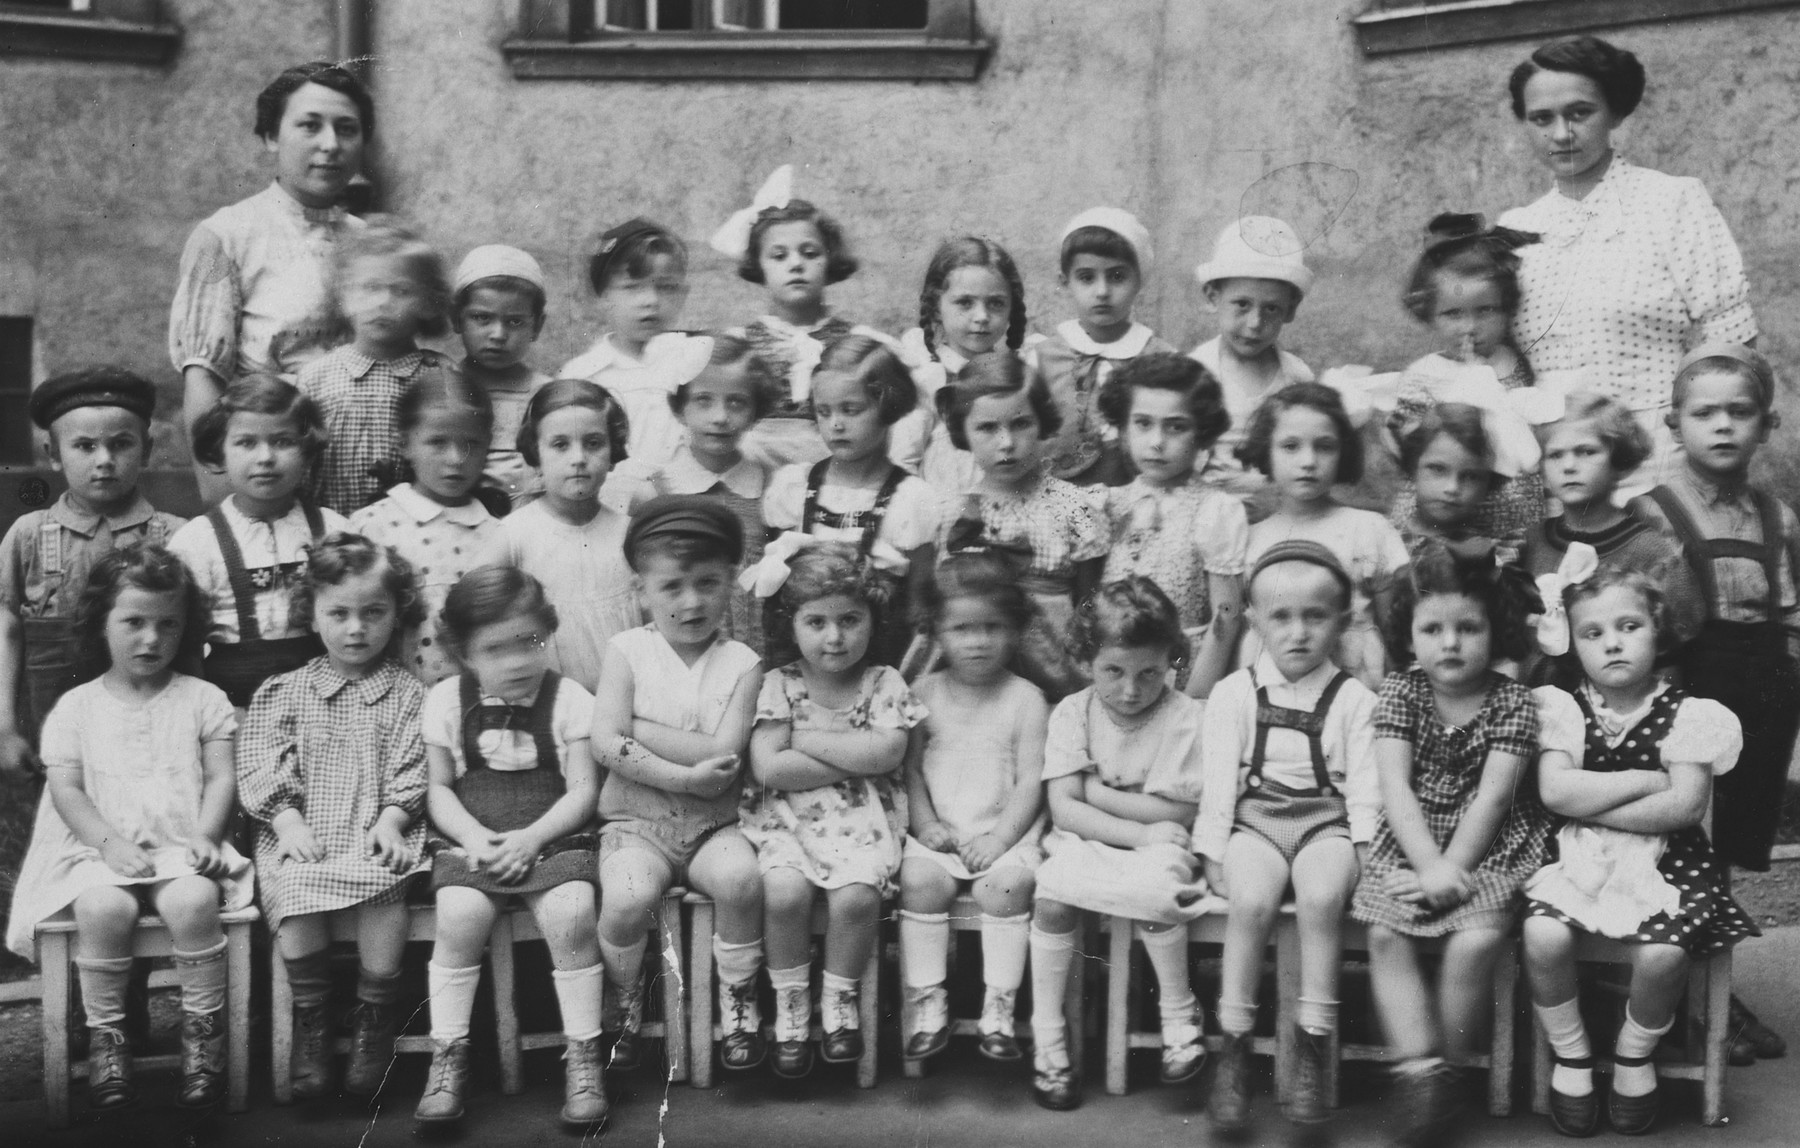 Class photograph of the Jewish kindergarten in Bratislava.

Among those pictured is Hetty Fisch, second row, fourth from the left.